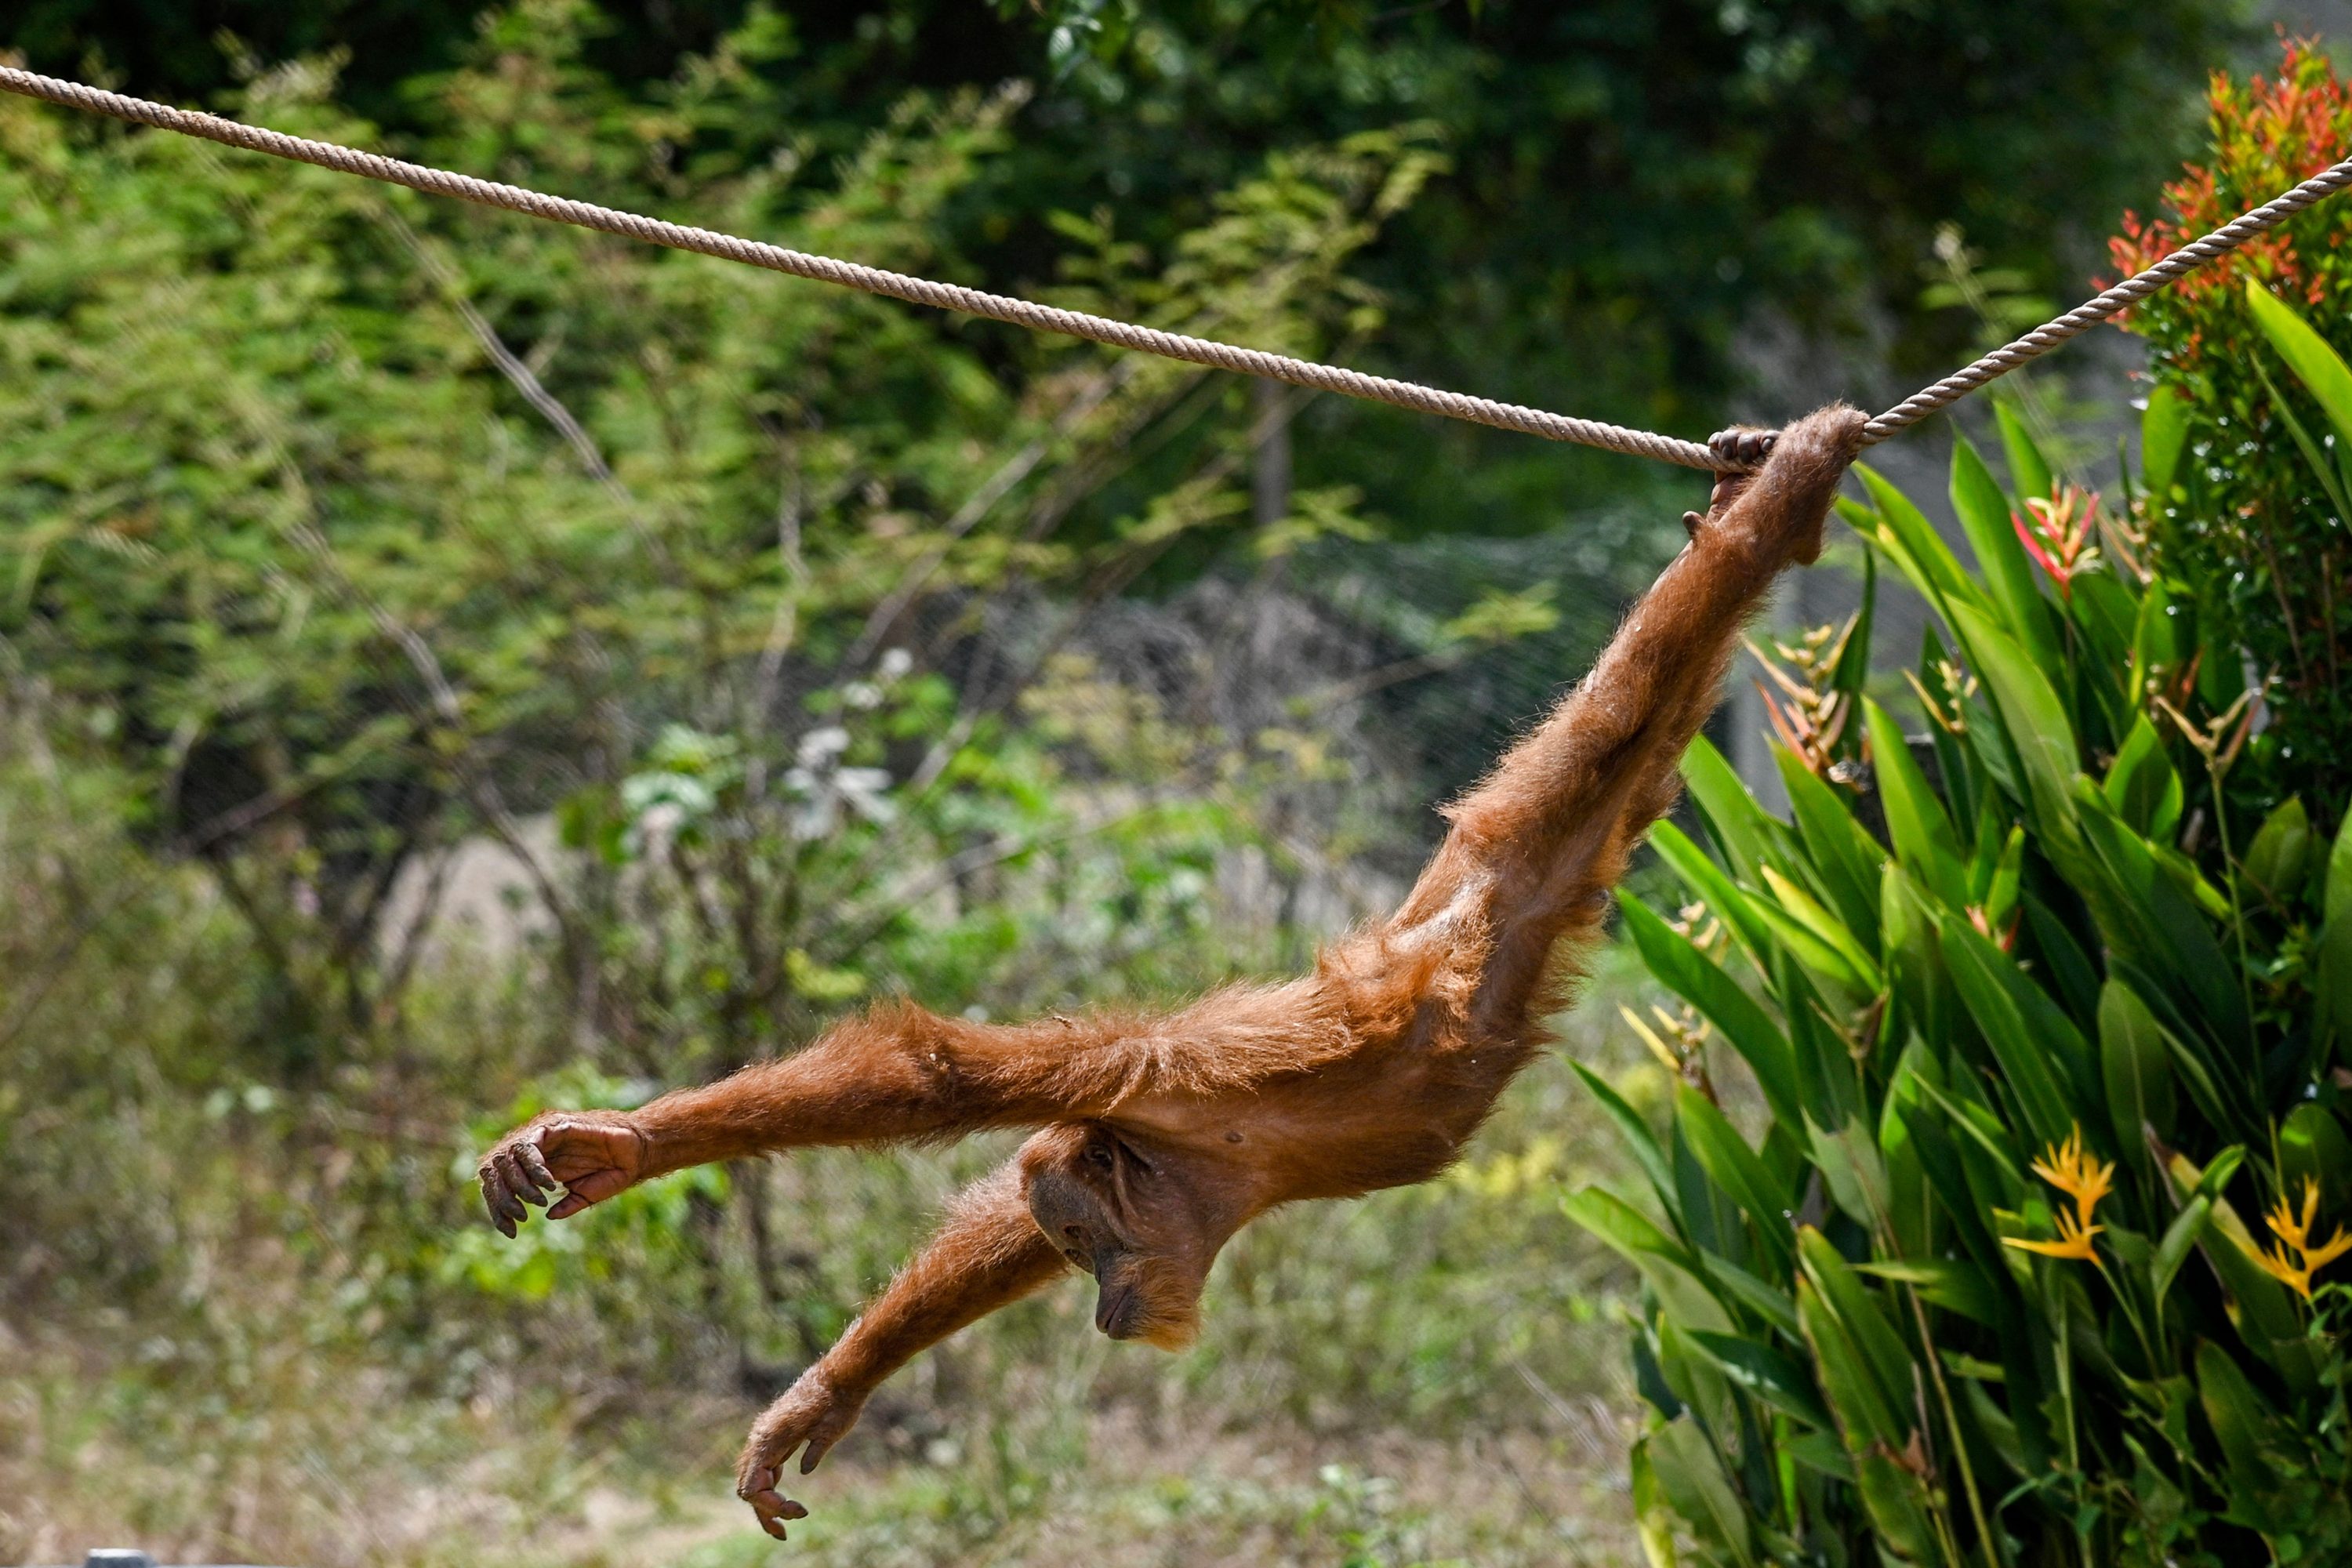 Apes Spin On Vines To Get High Because They Haven't Discovered Whippits